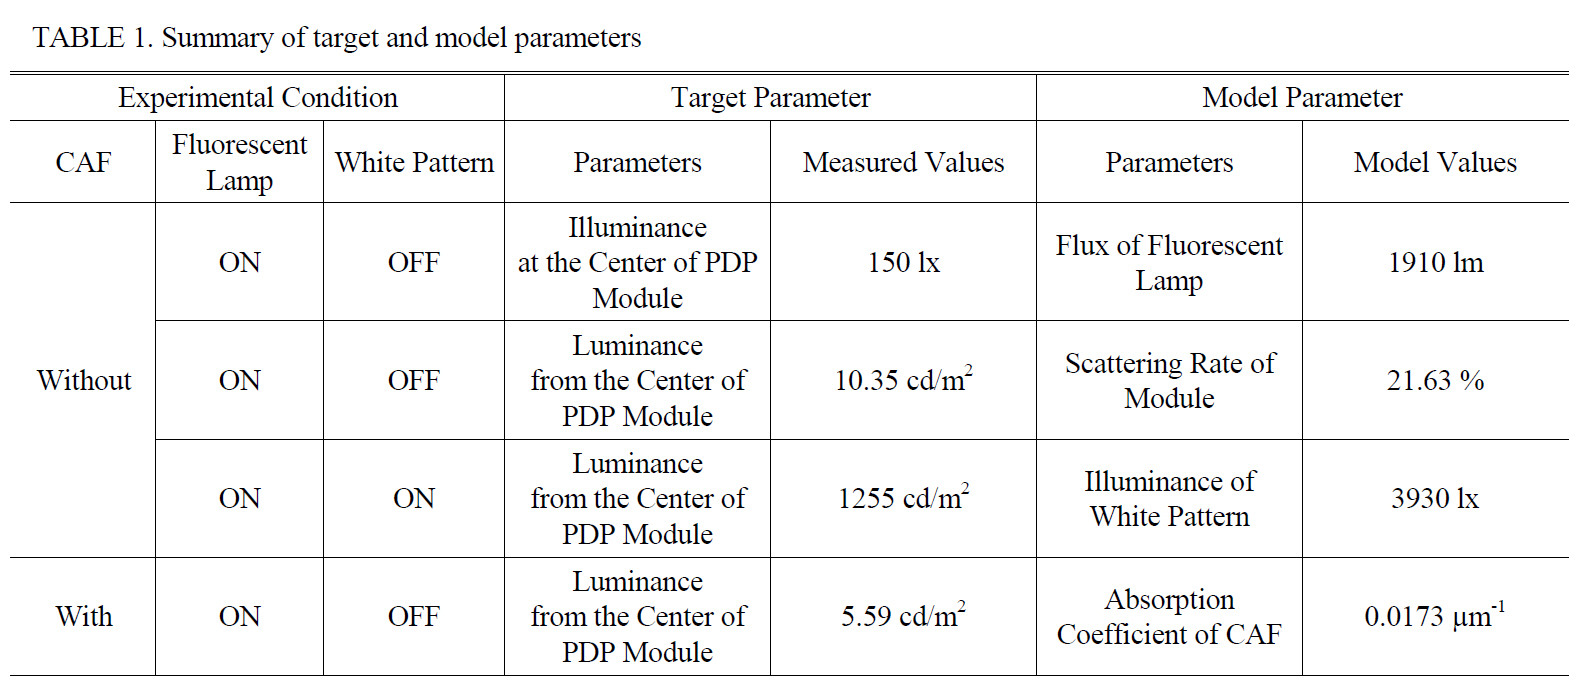 Summary of target and model parameters